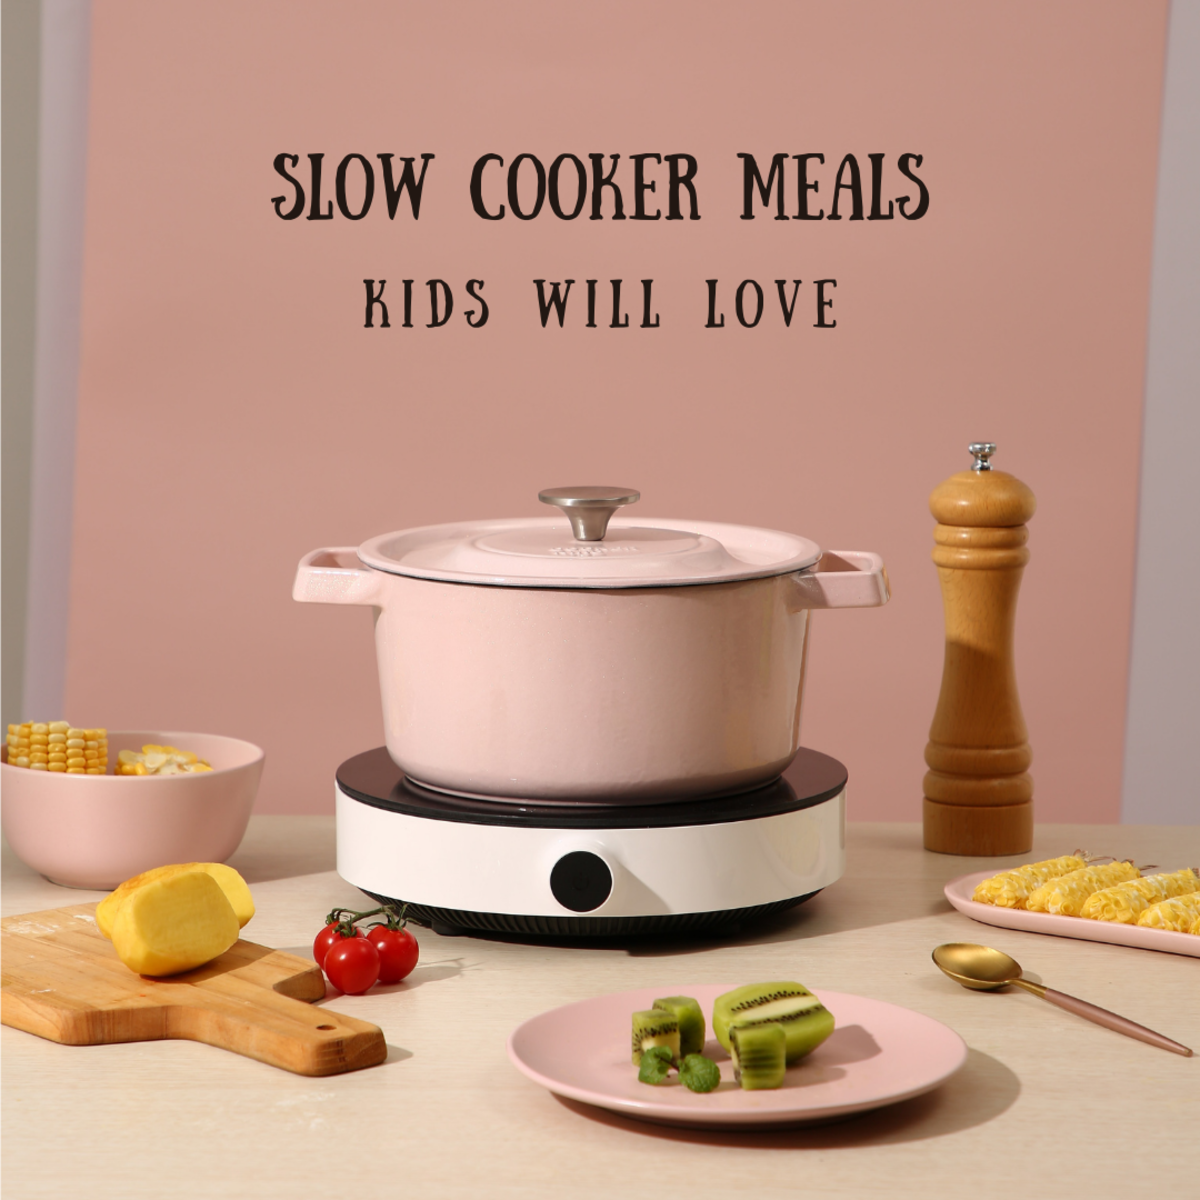 2 Kid-Friendly Slow Cooker Recipes: Meatloaf & Chicken Chili